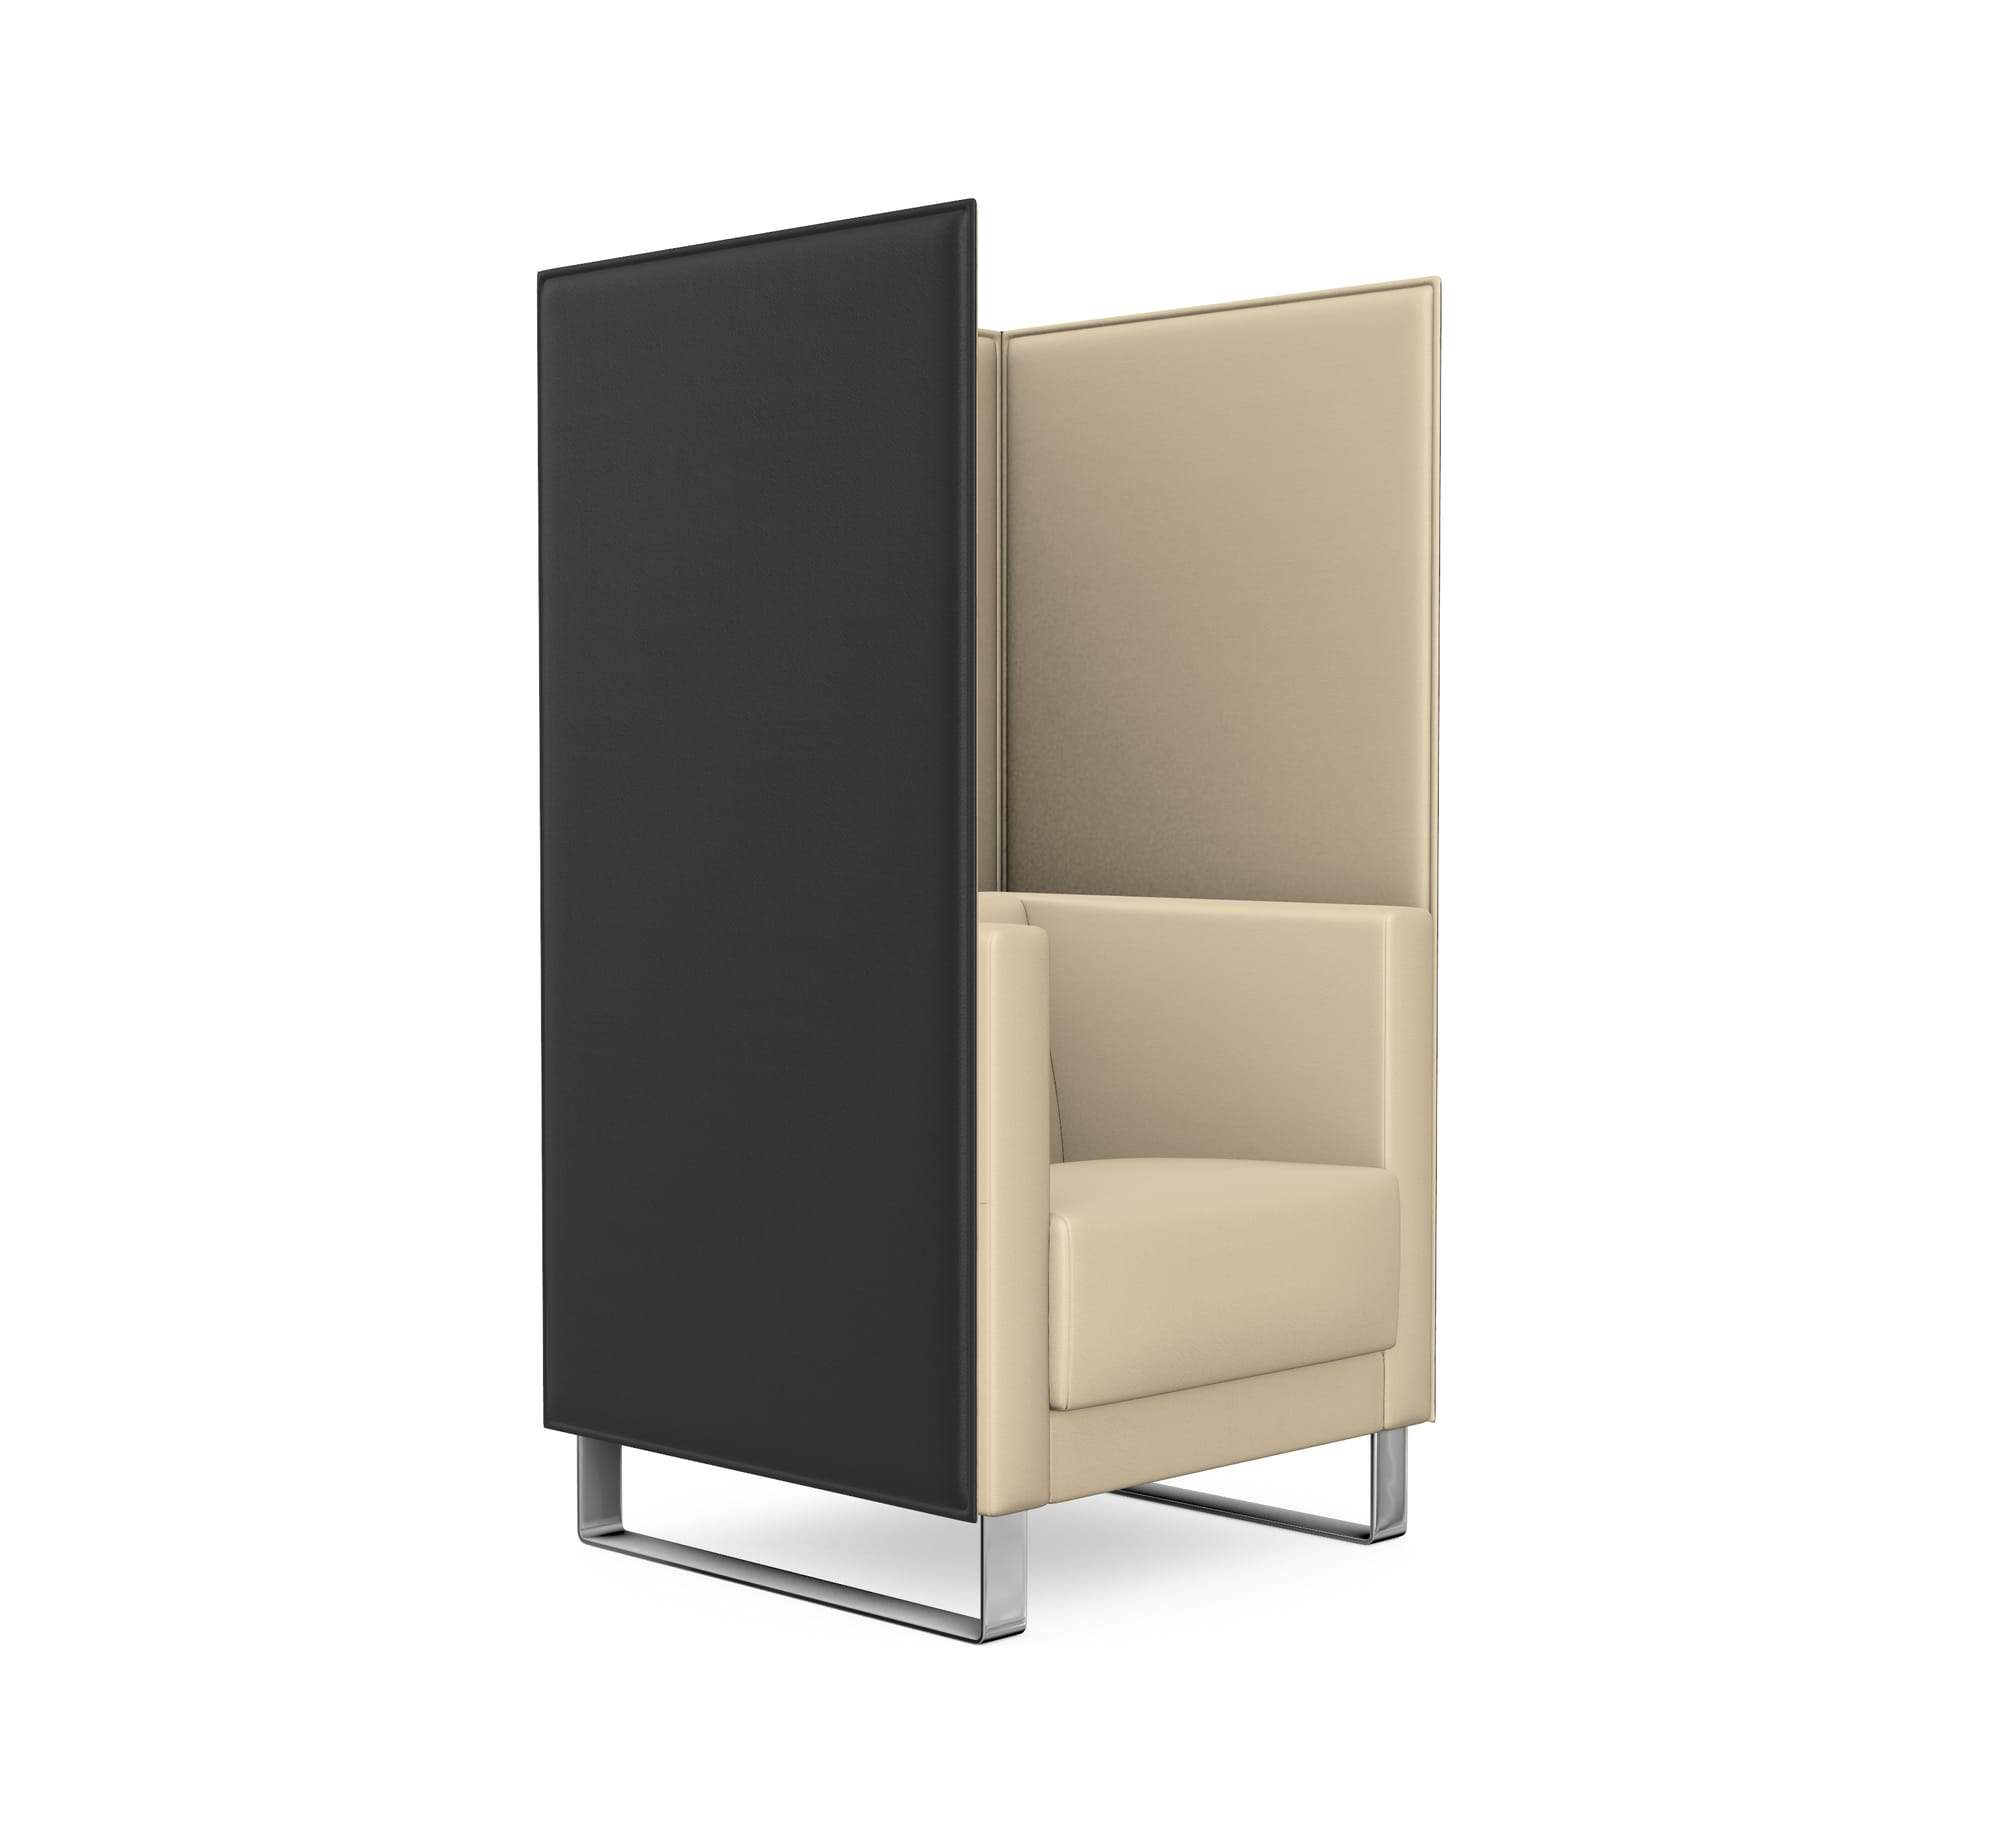 Vancouver Lite Armchair with Partition Walls